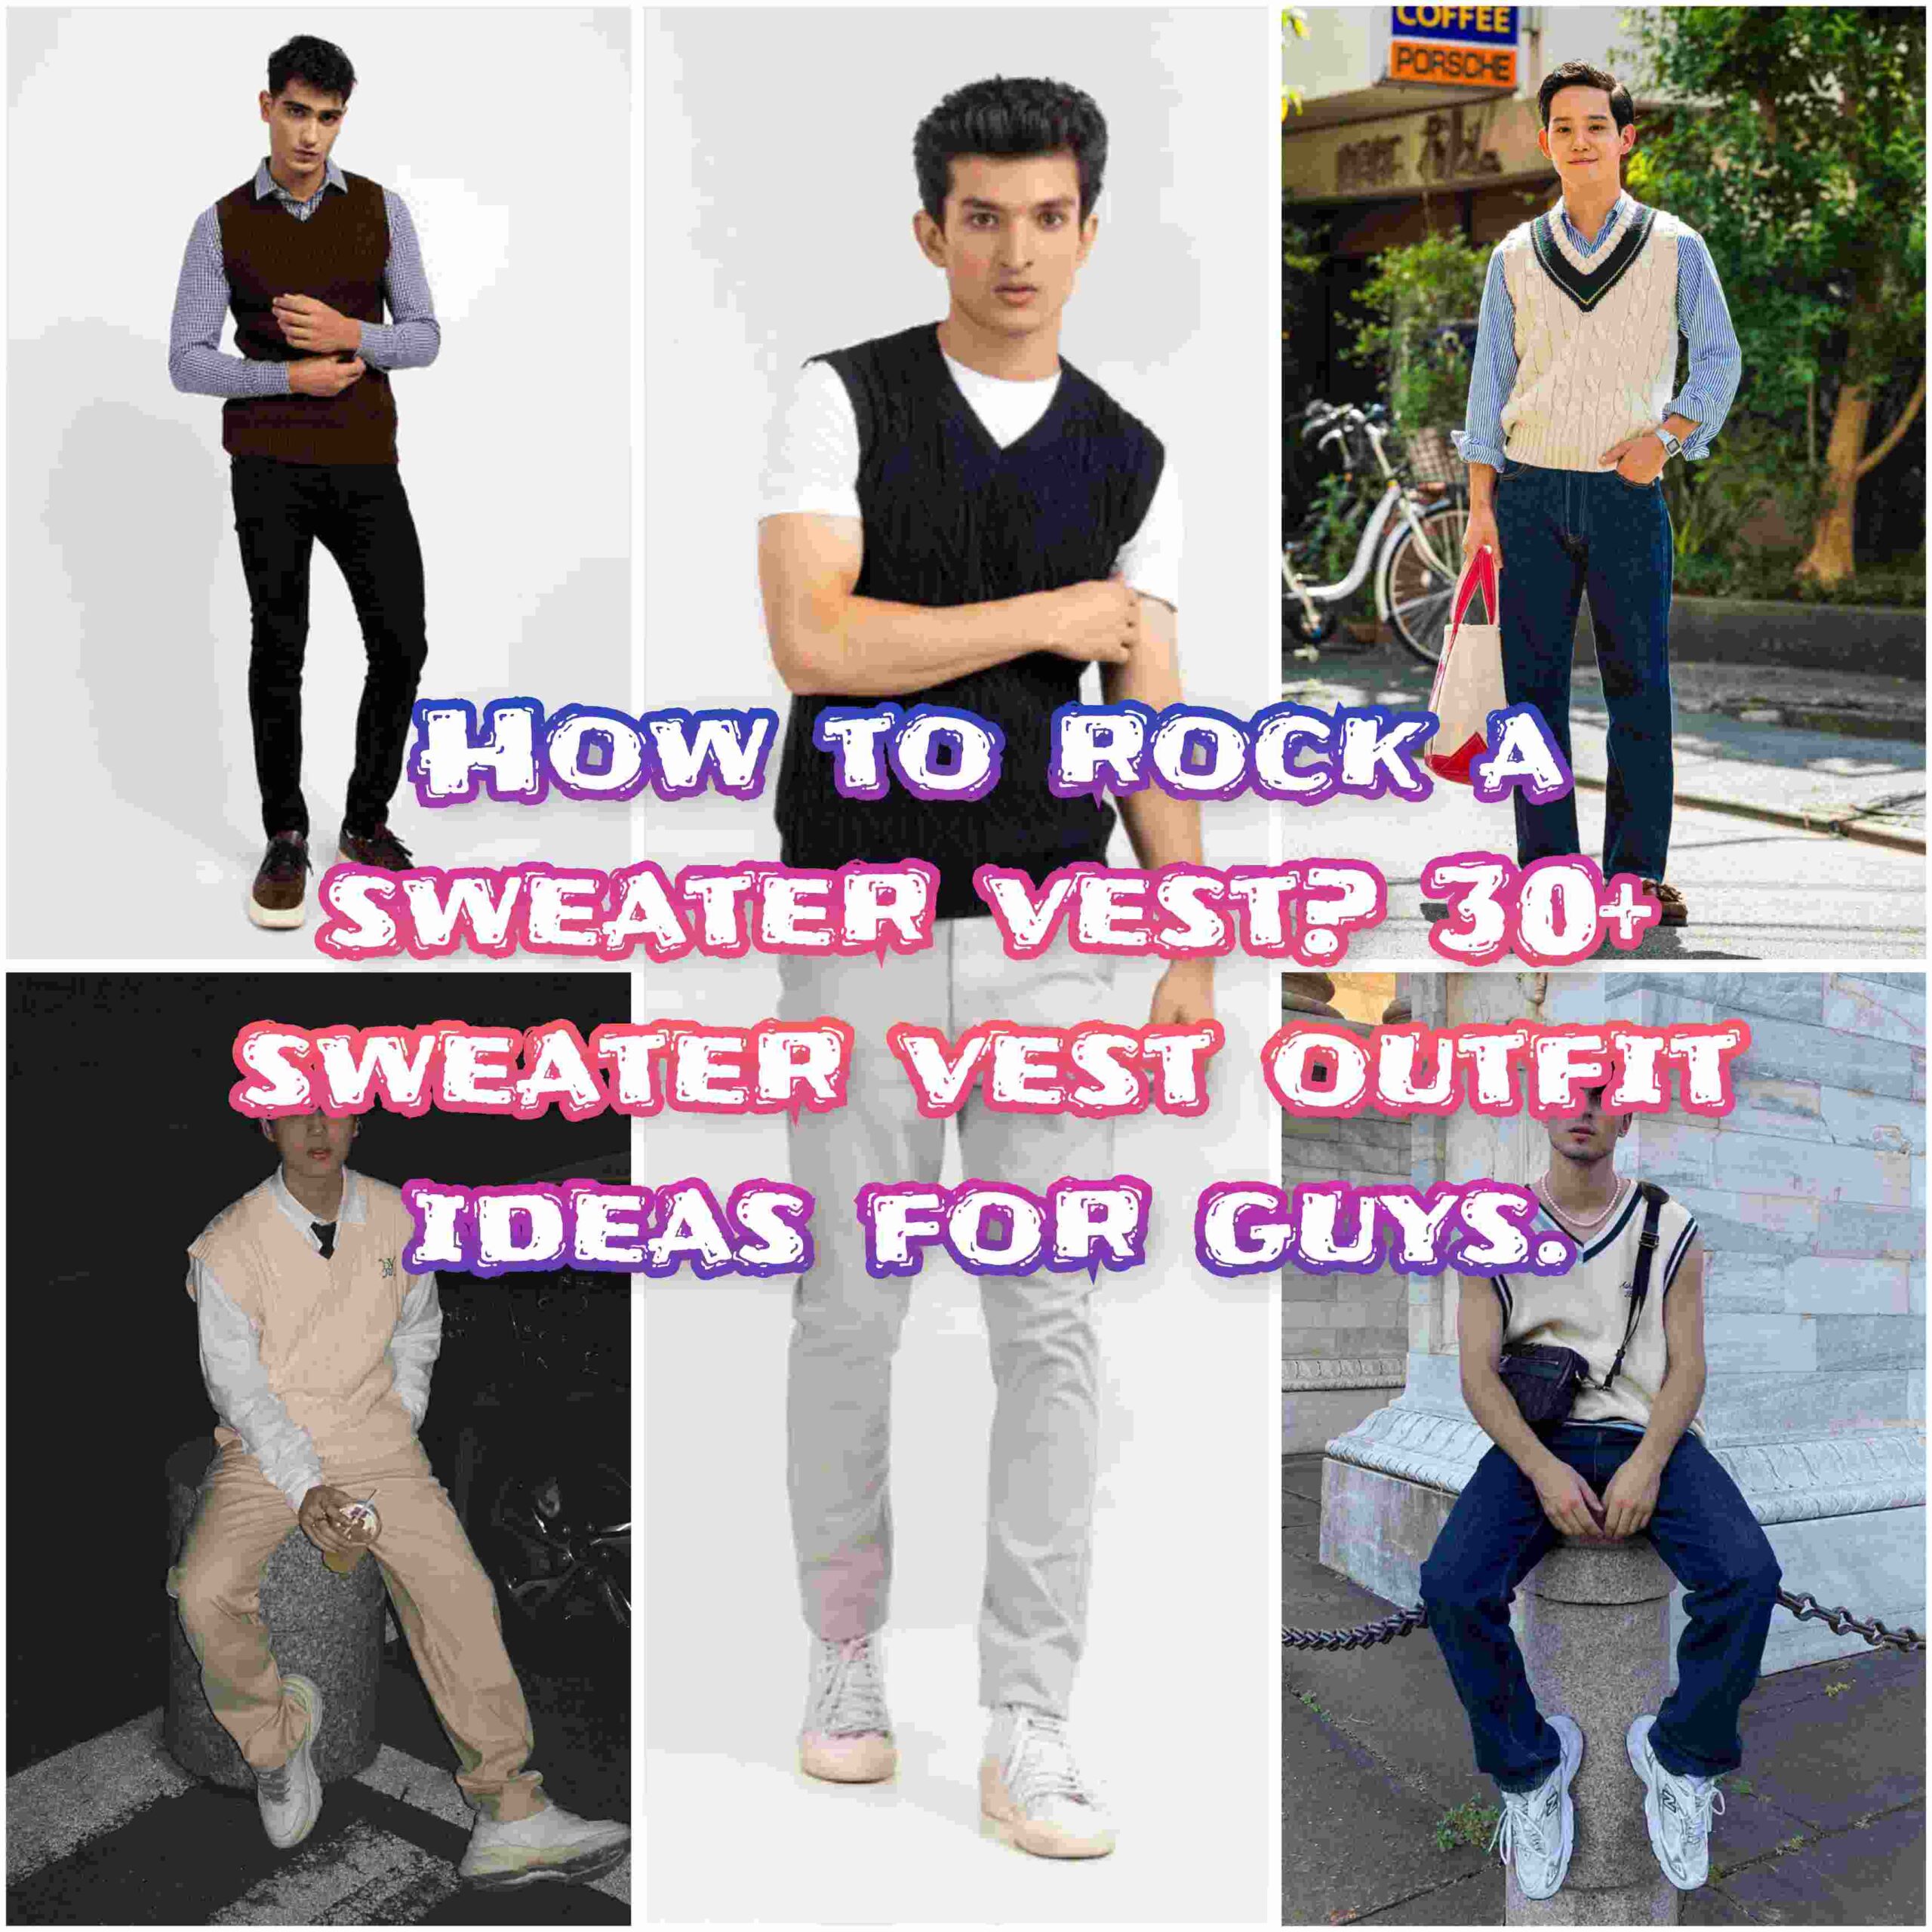 sweater vest outfit ideas for guys.